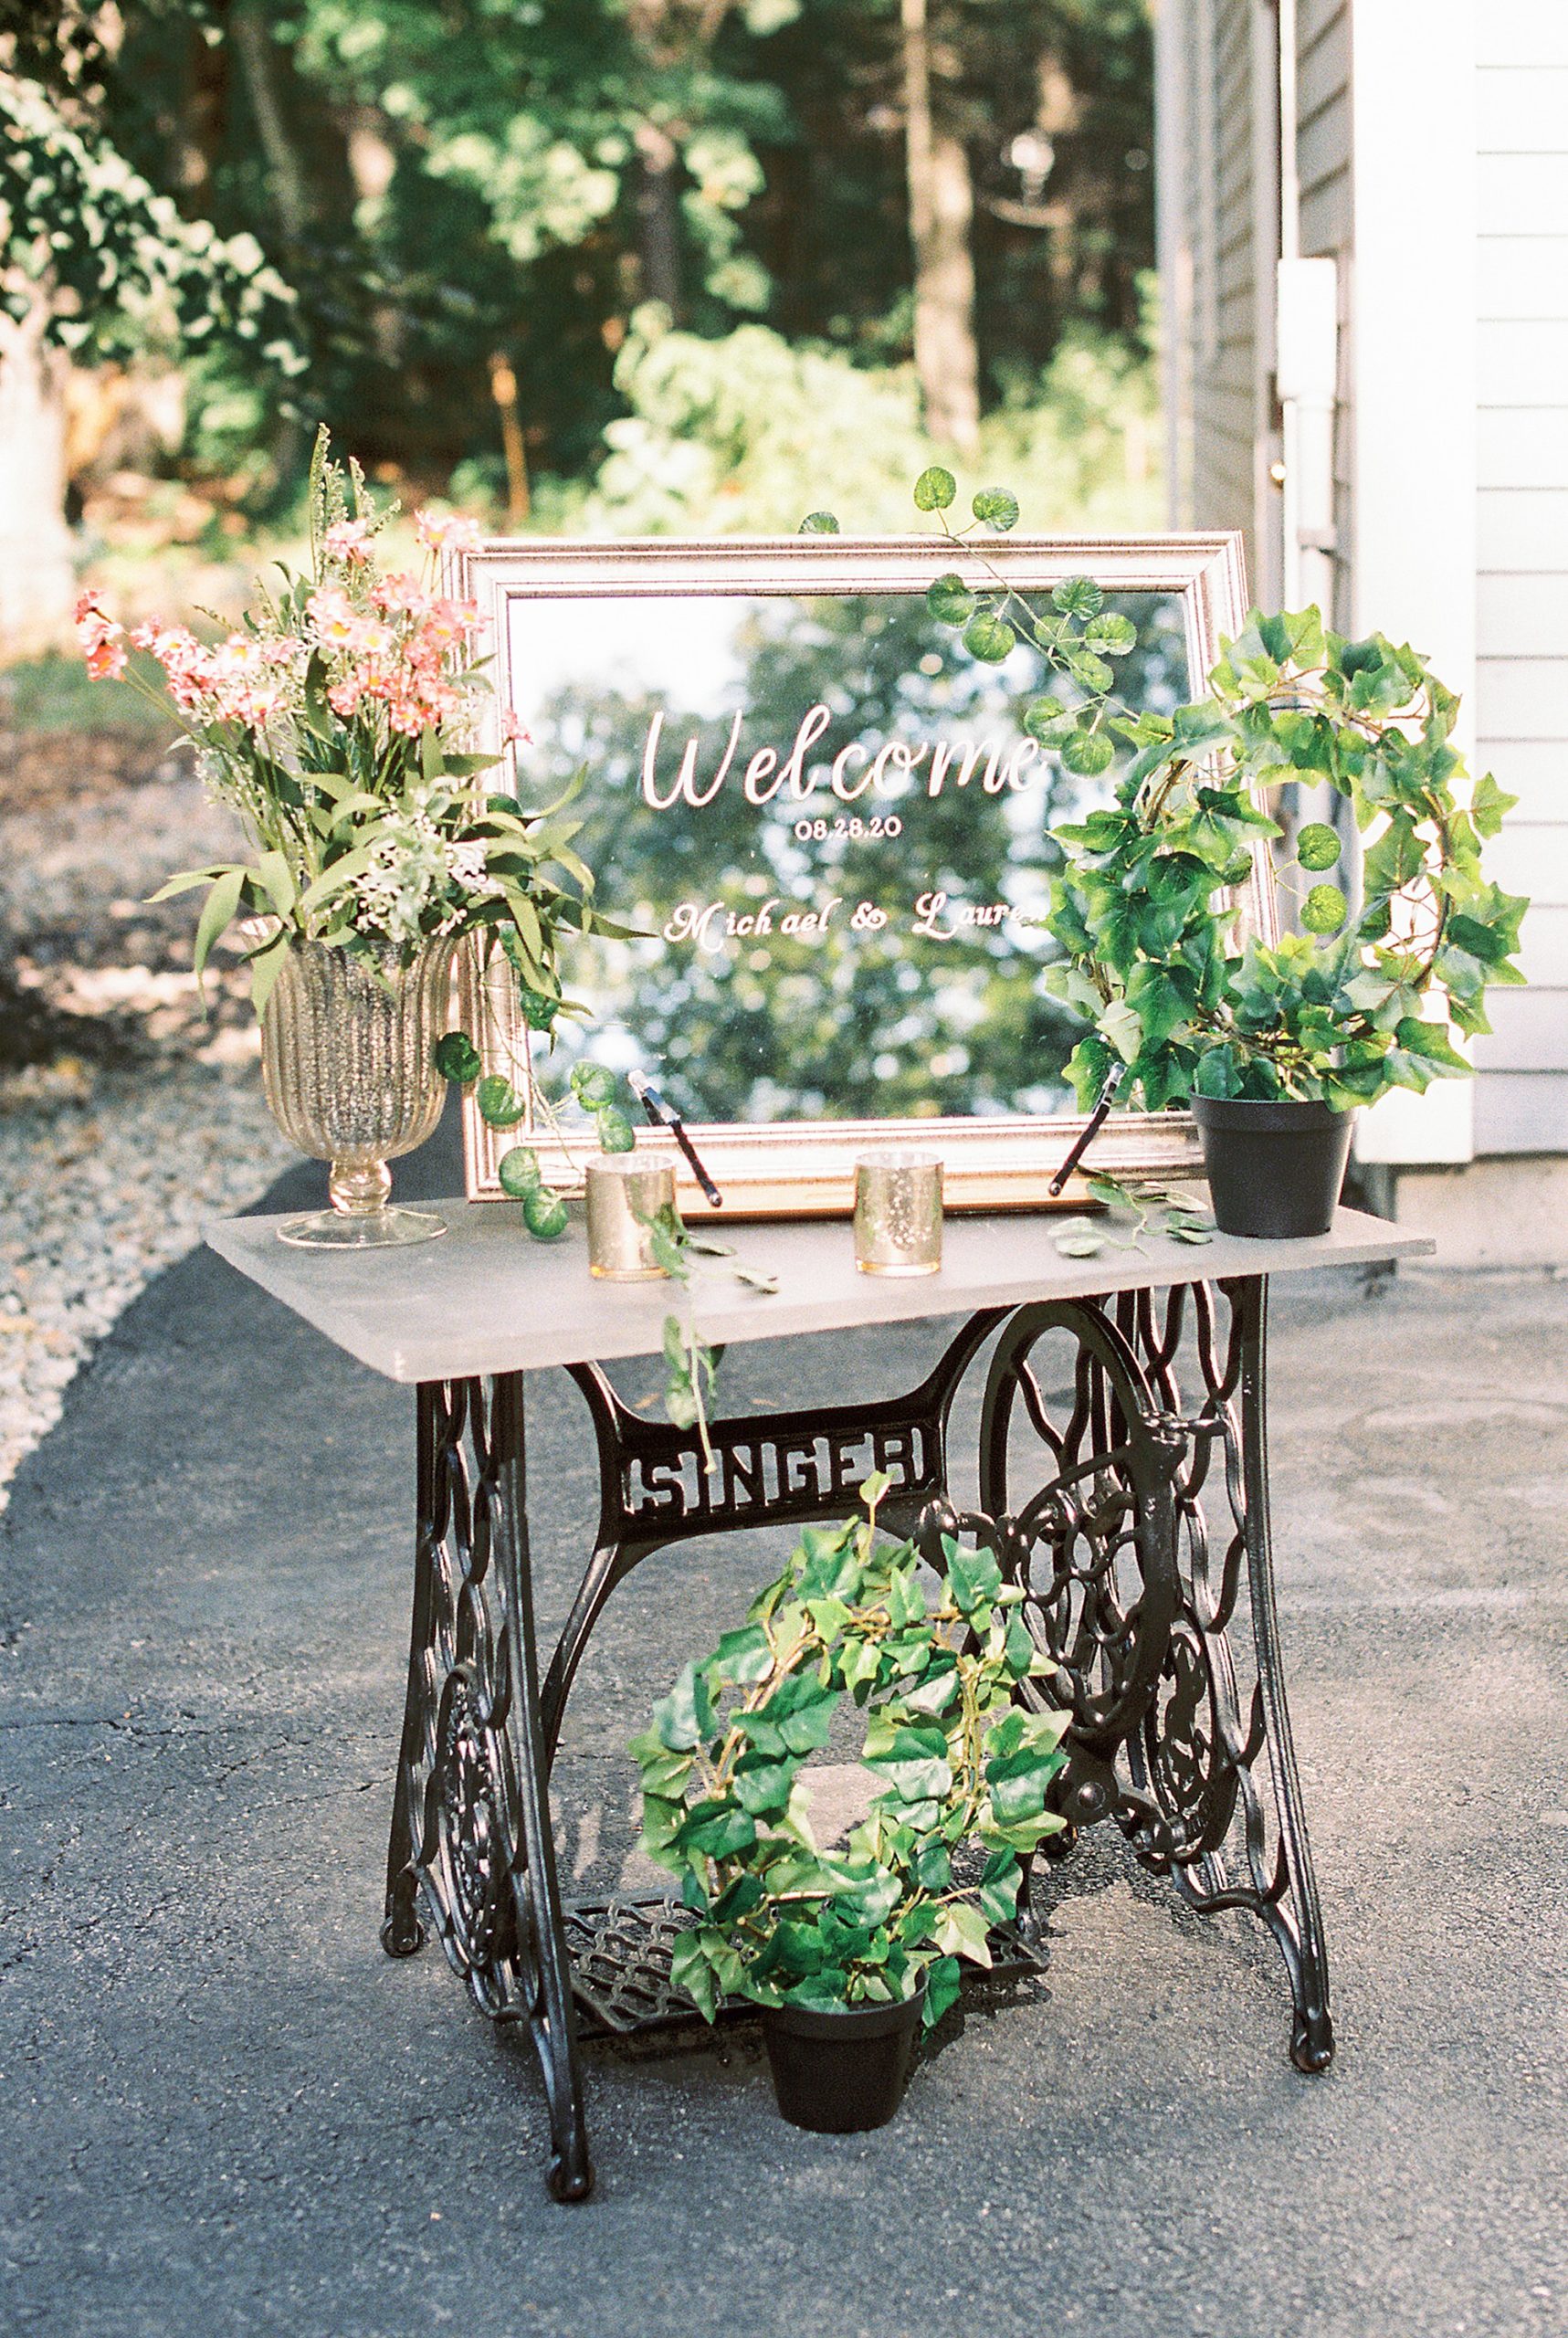 welcome sign on gilded mirror and vintage sewing table decorated with plants